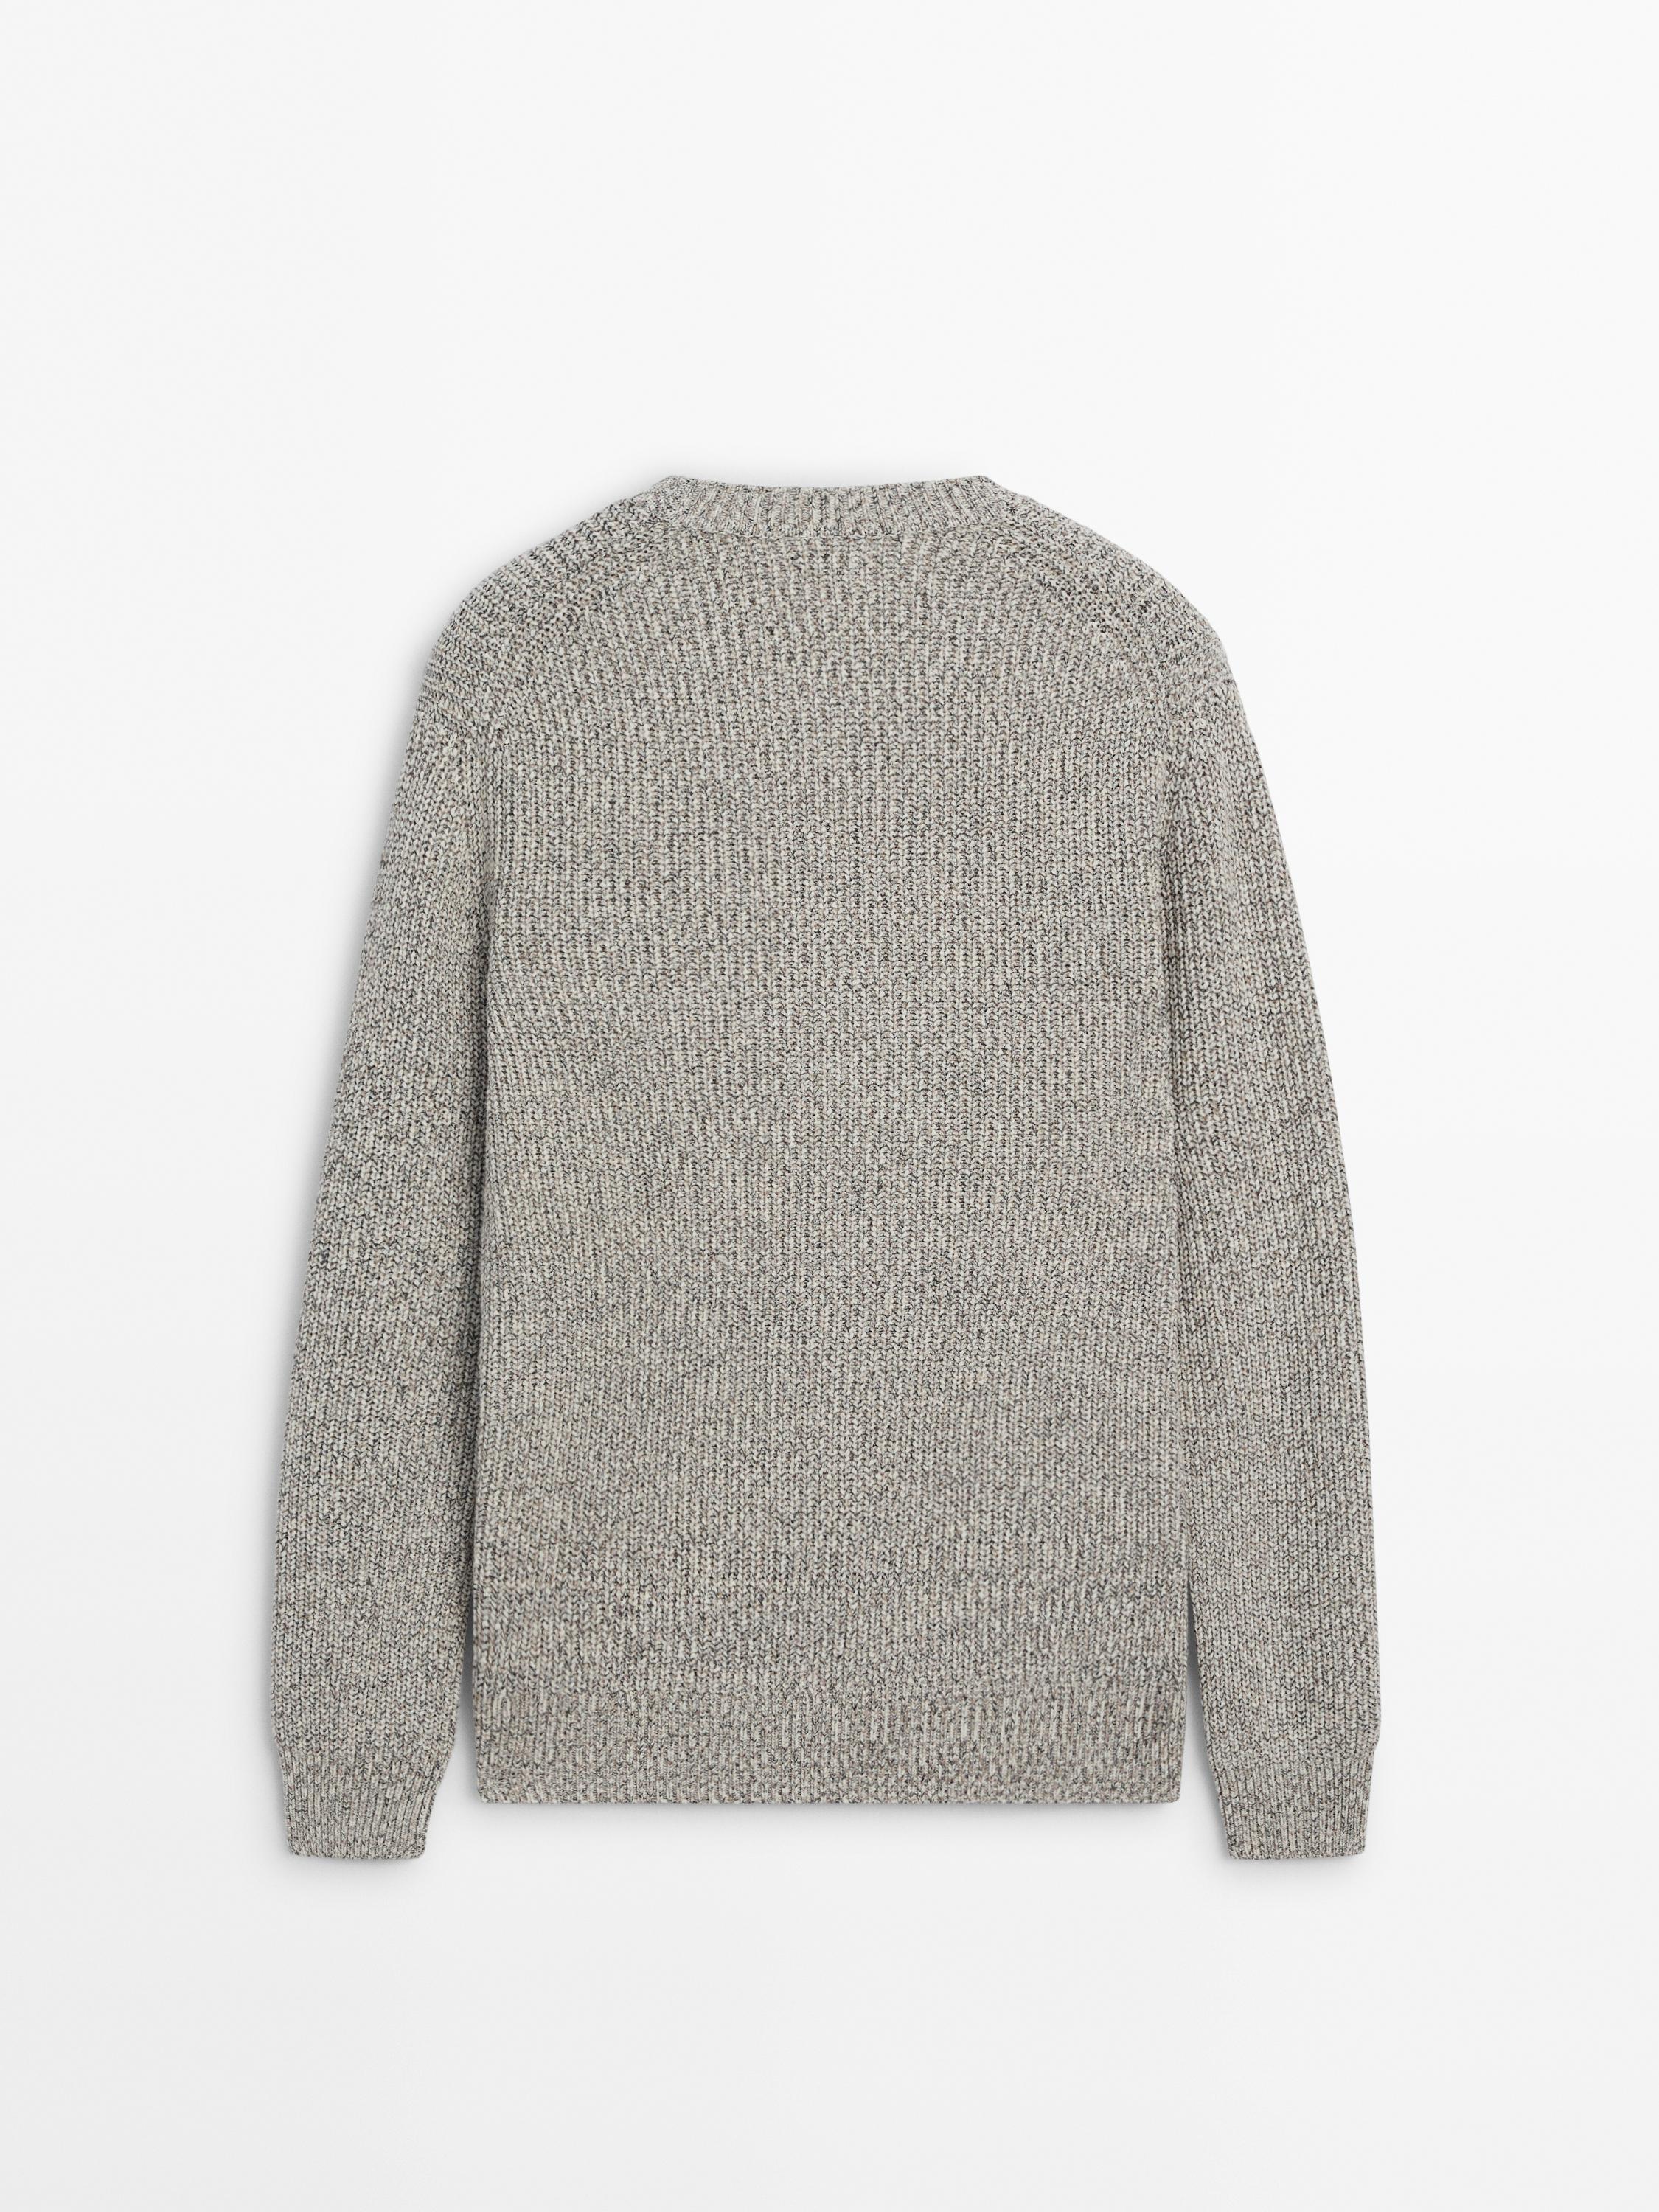 Cotton blend knit sweater with crew neck